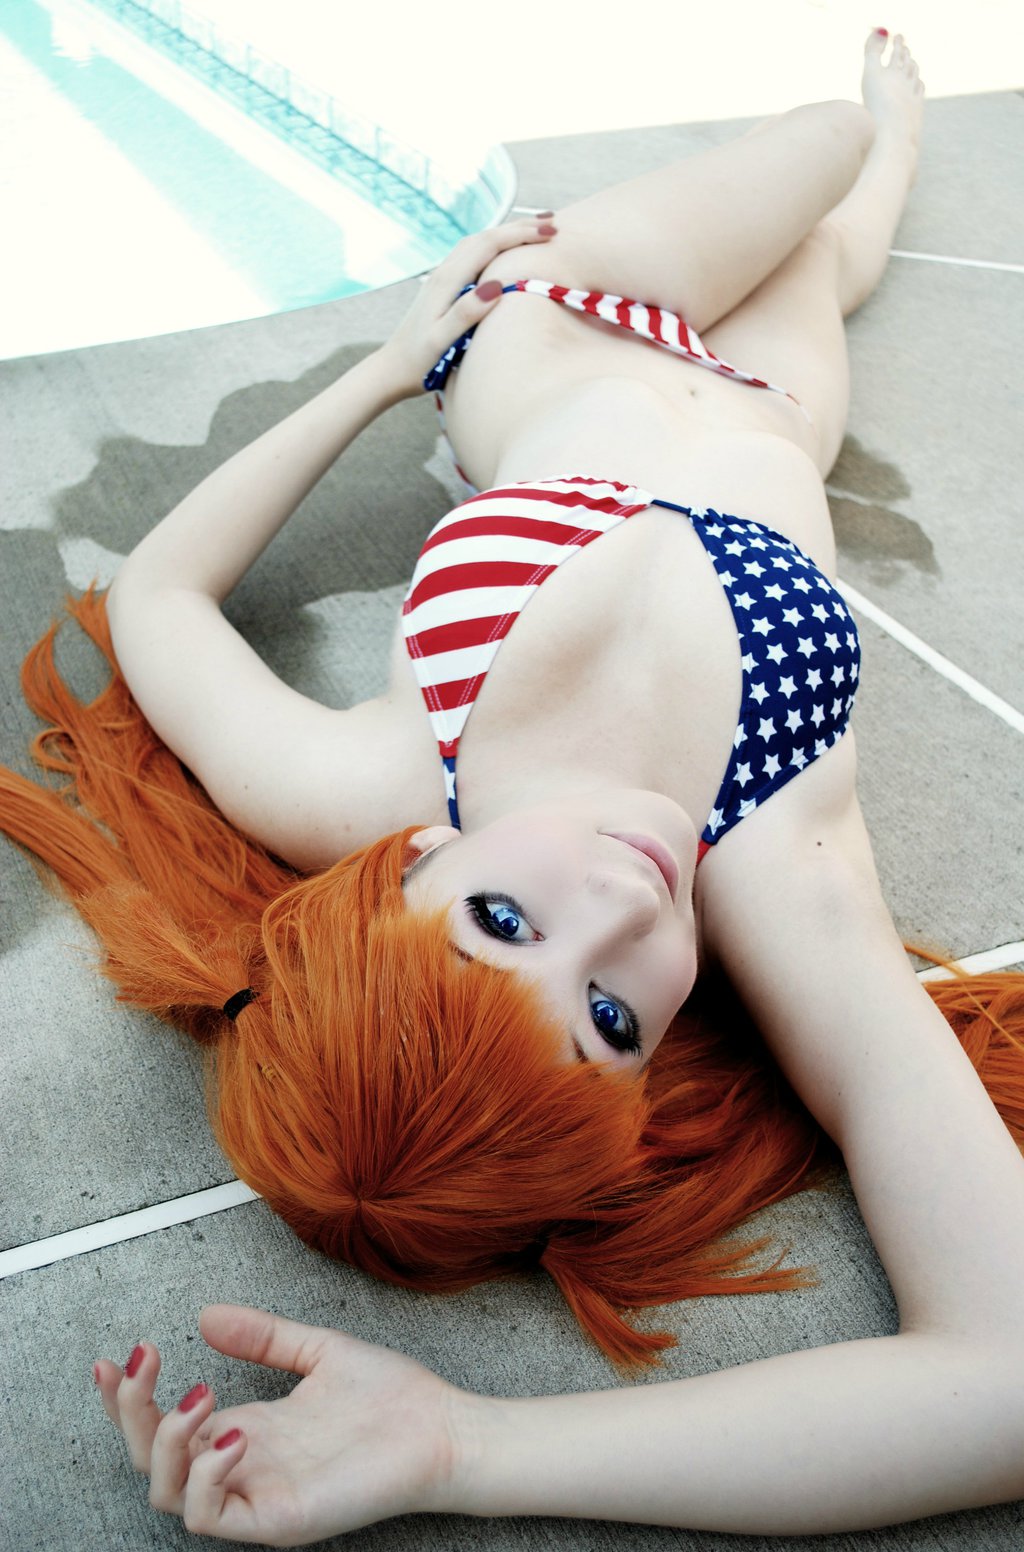 evangelion  poolside asuka By tipsy G d6eox2b